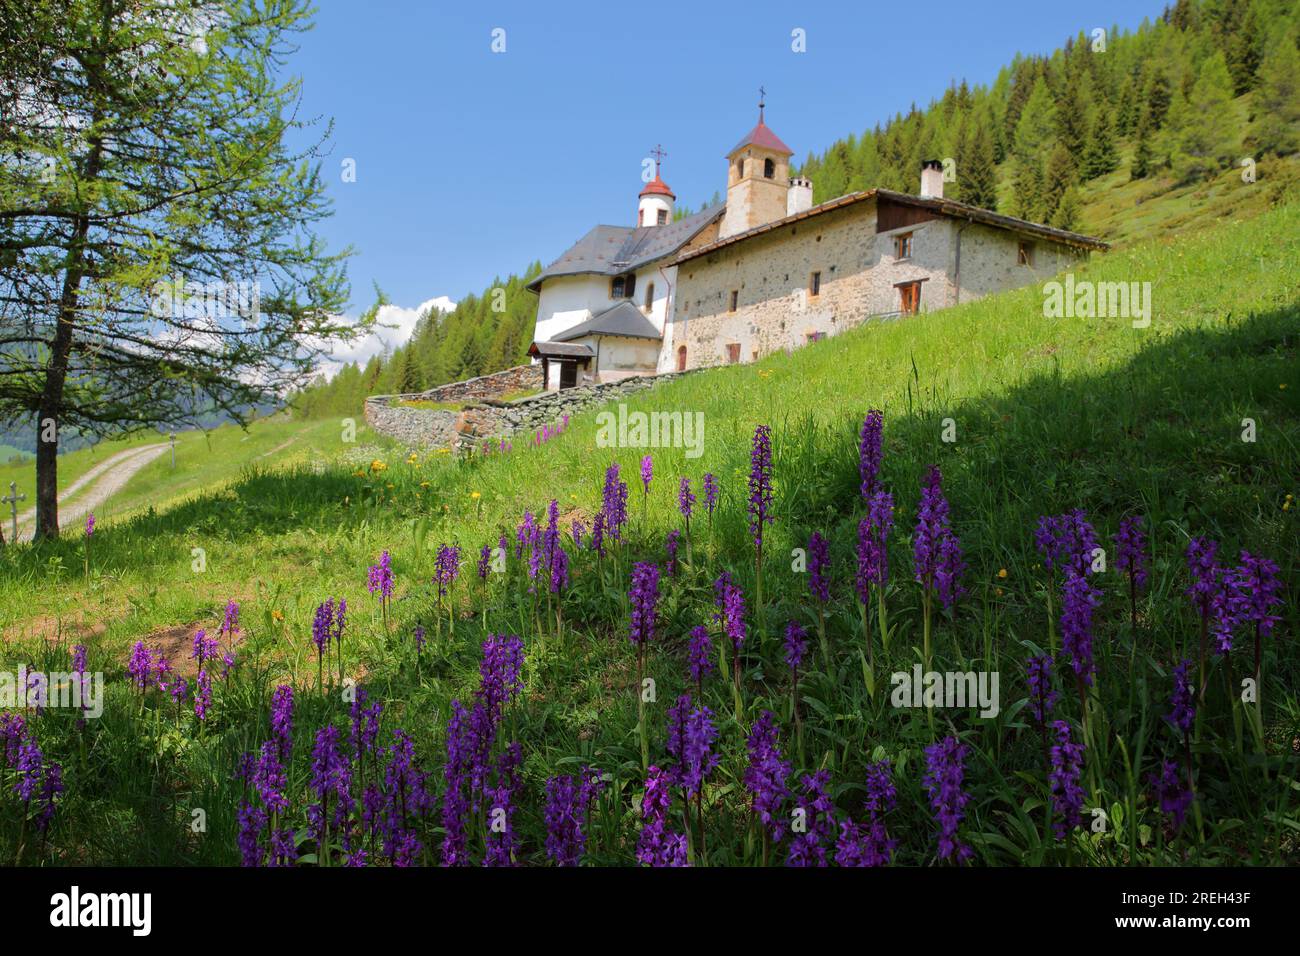 Notre Dame des Vernettes sanctuary (dated from 18 century), a church located above Peisey Nancroix, Northern French Alps, Tarentaise, Savoie, France Stock Photo